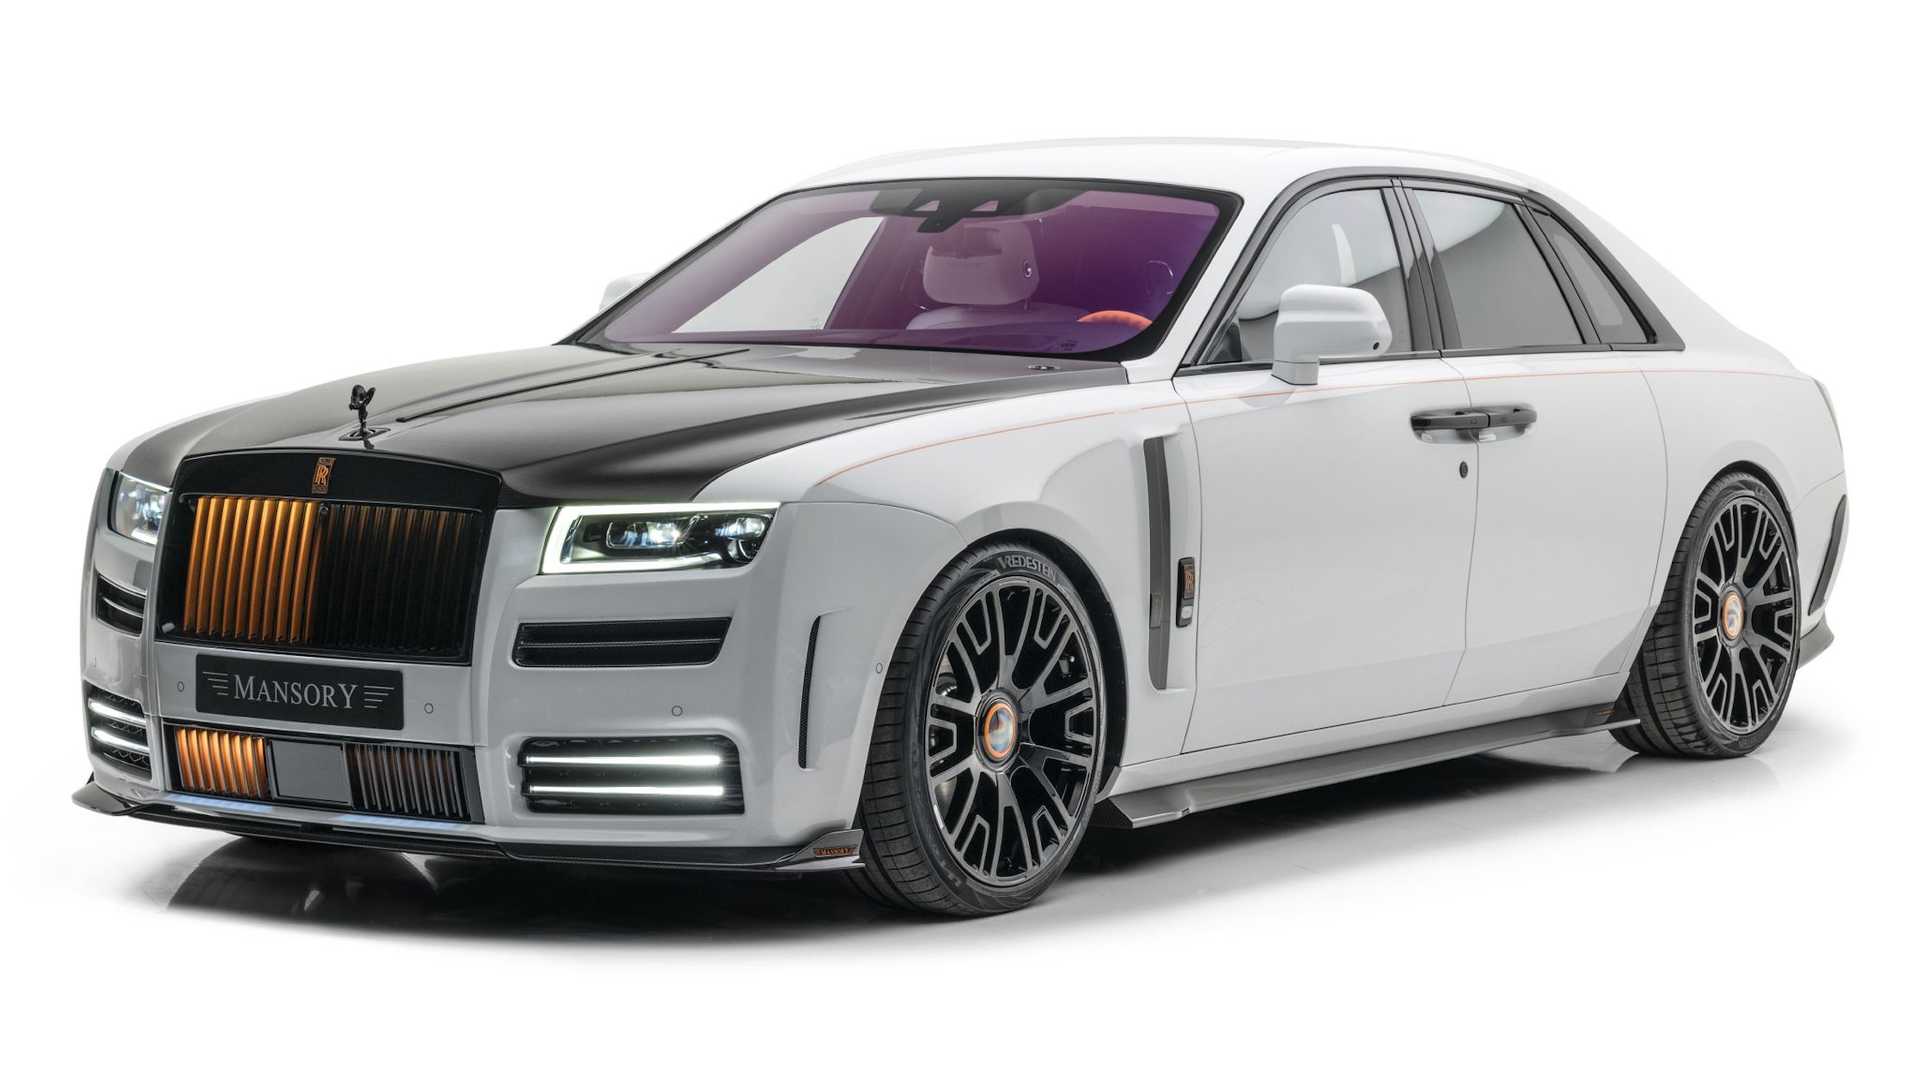 2018 RollsRoyce Wraith  News reviews picture galleries and videos  The  Car Guide